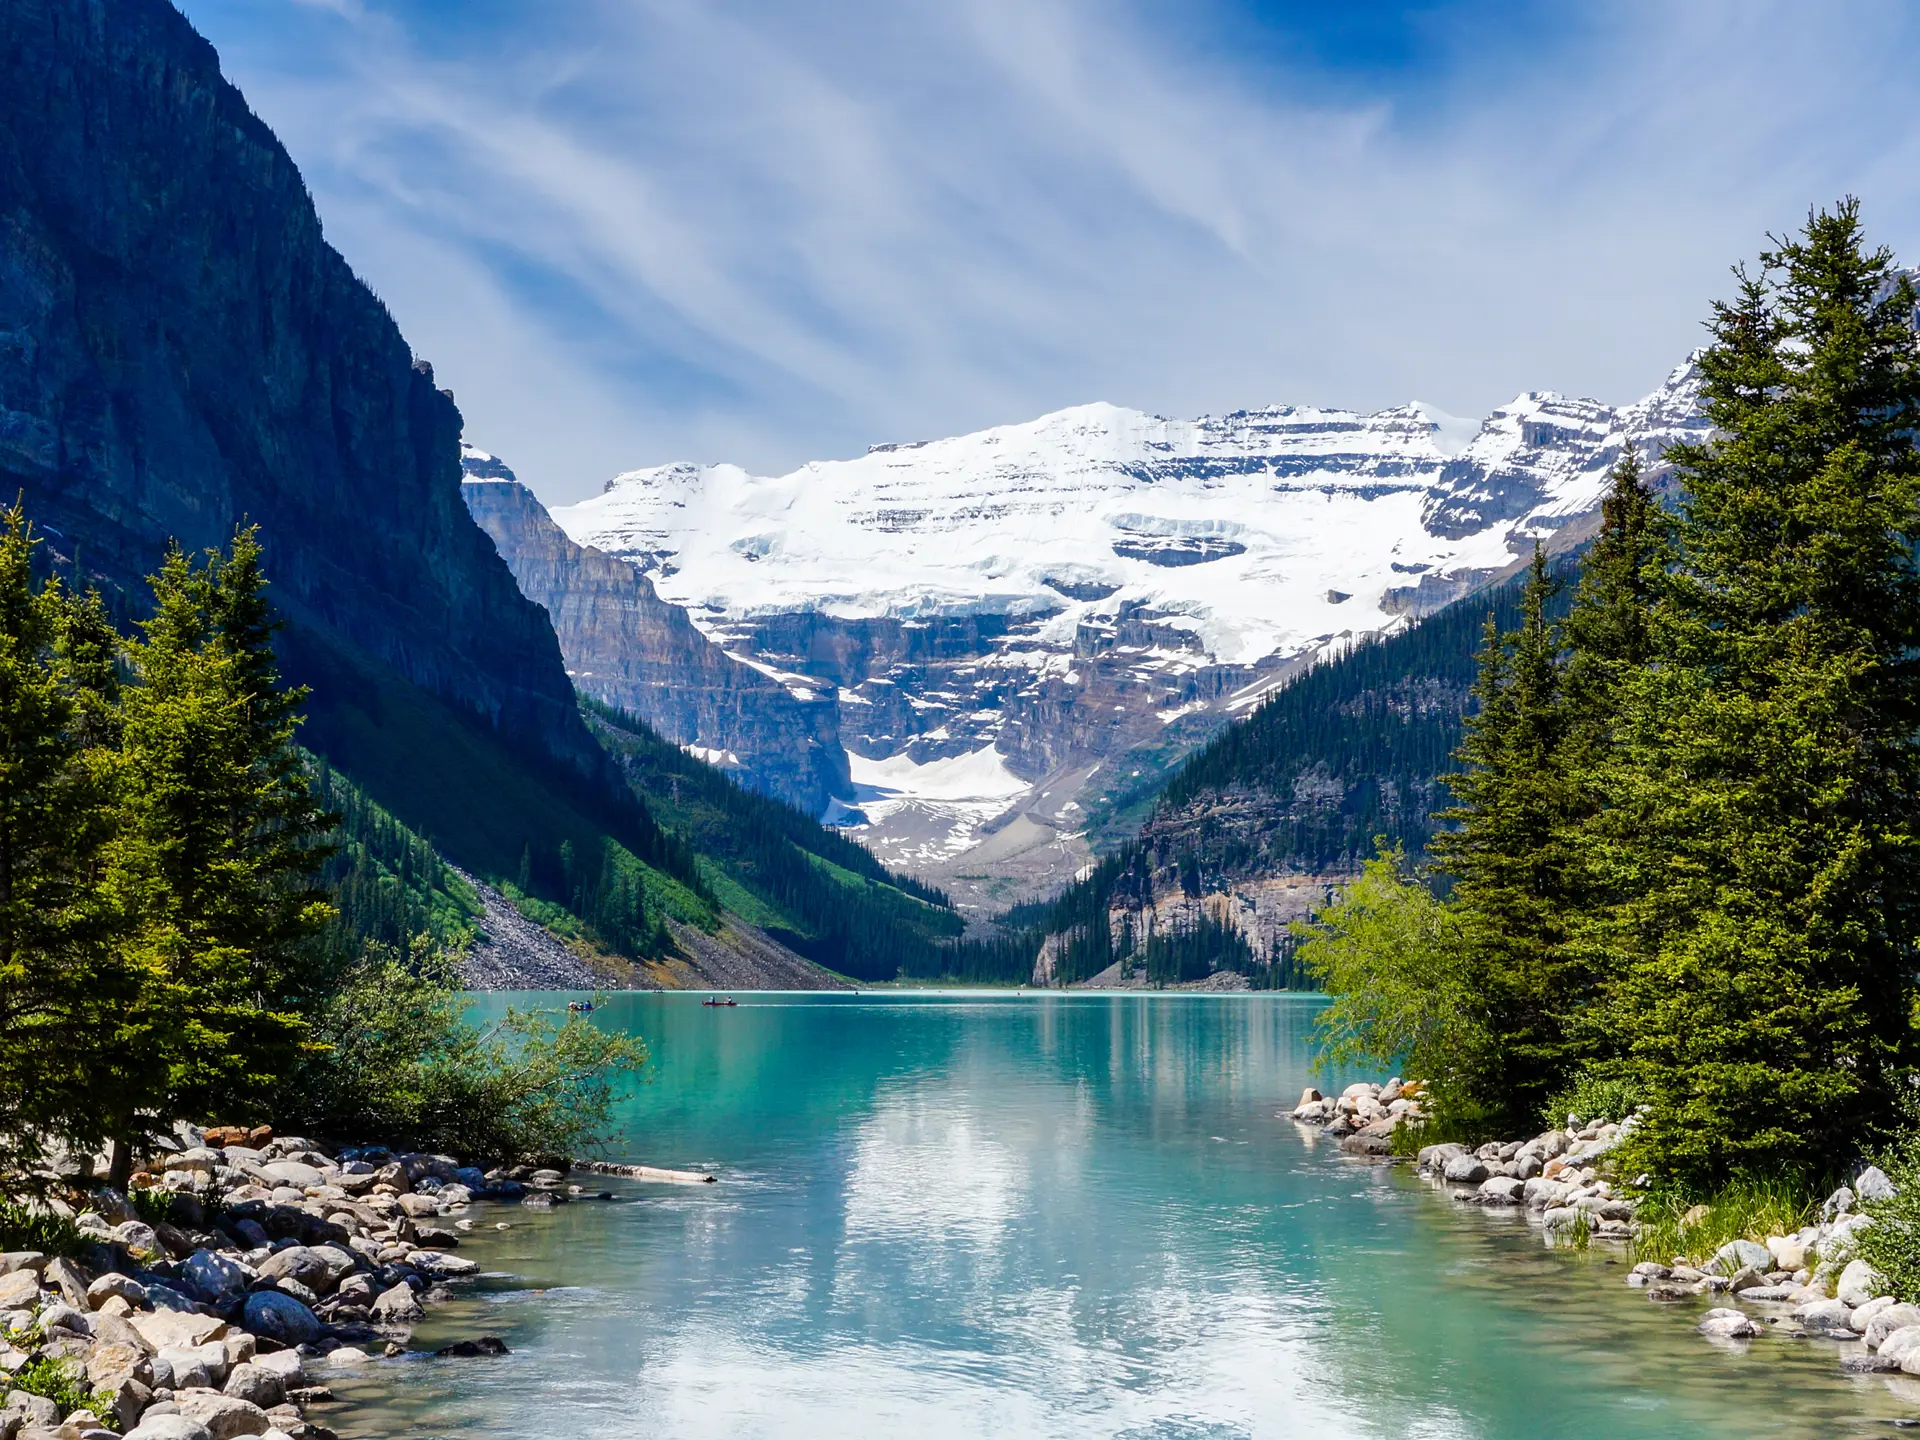 shutterstock_209238454 Beautiful Lake Louise with Victoria Glacier in the background and a glistening emerald lake. Several canoes can be seen..jpg